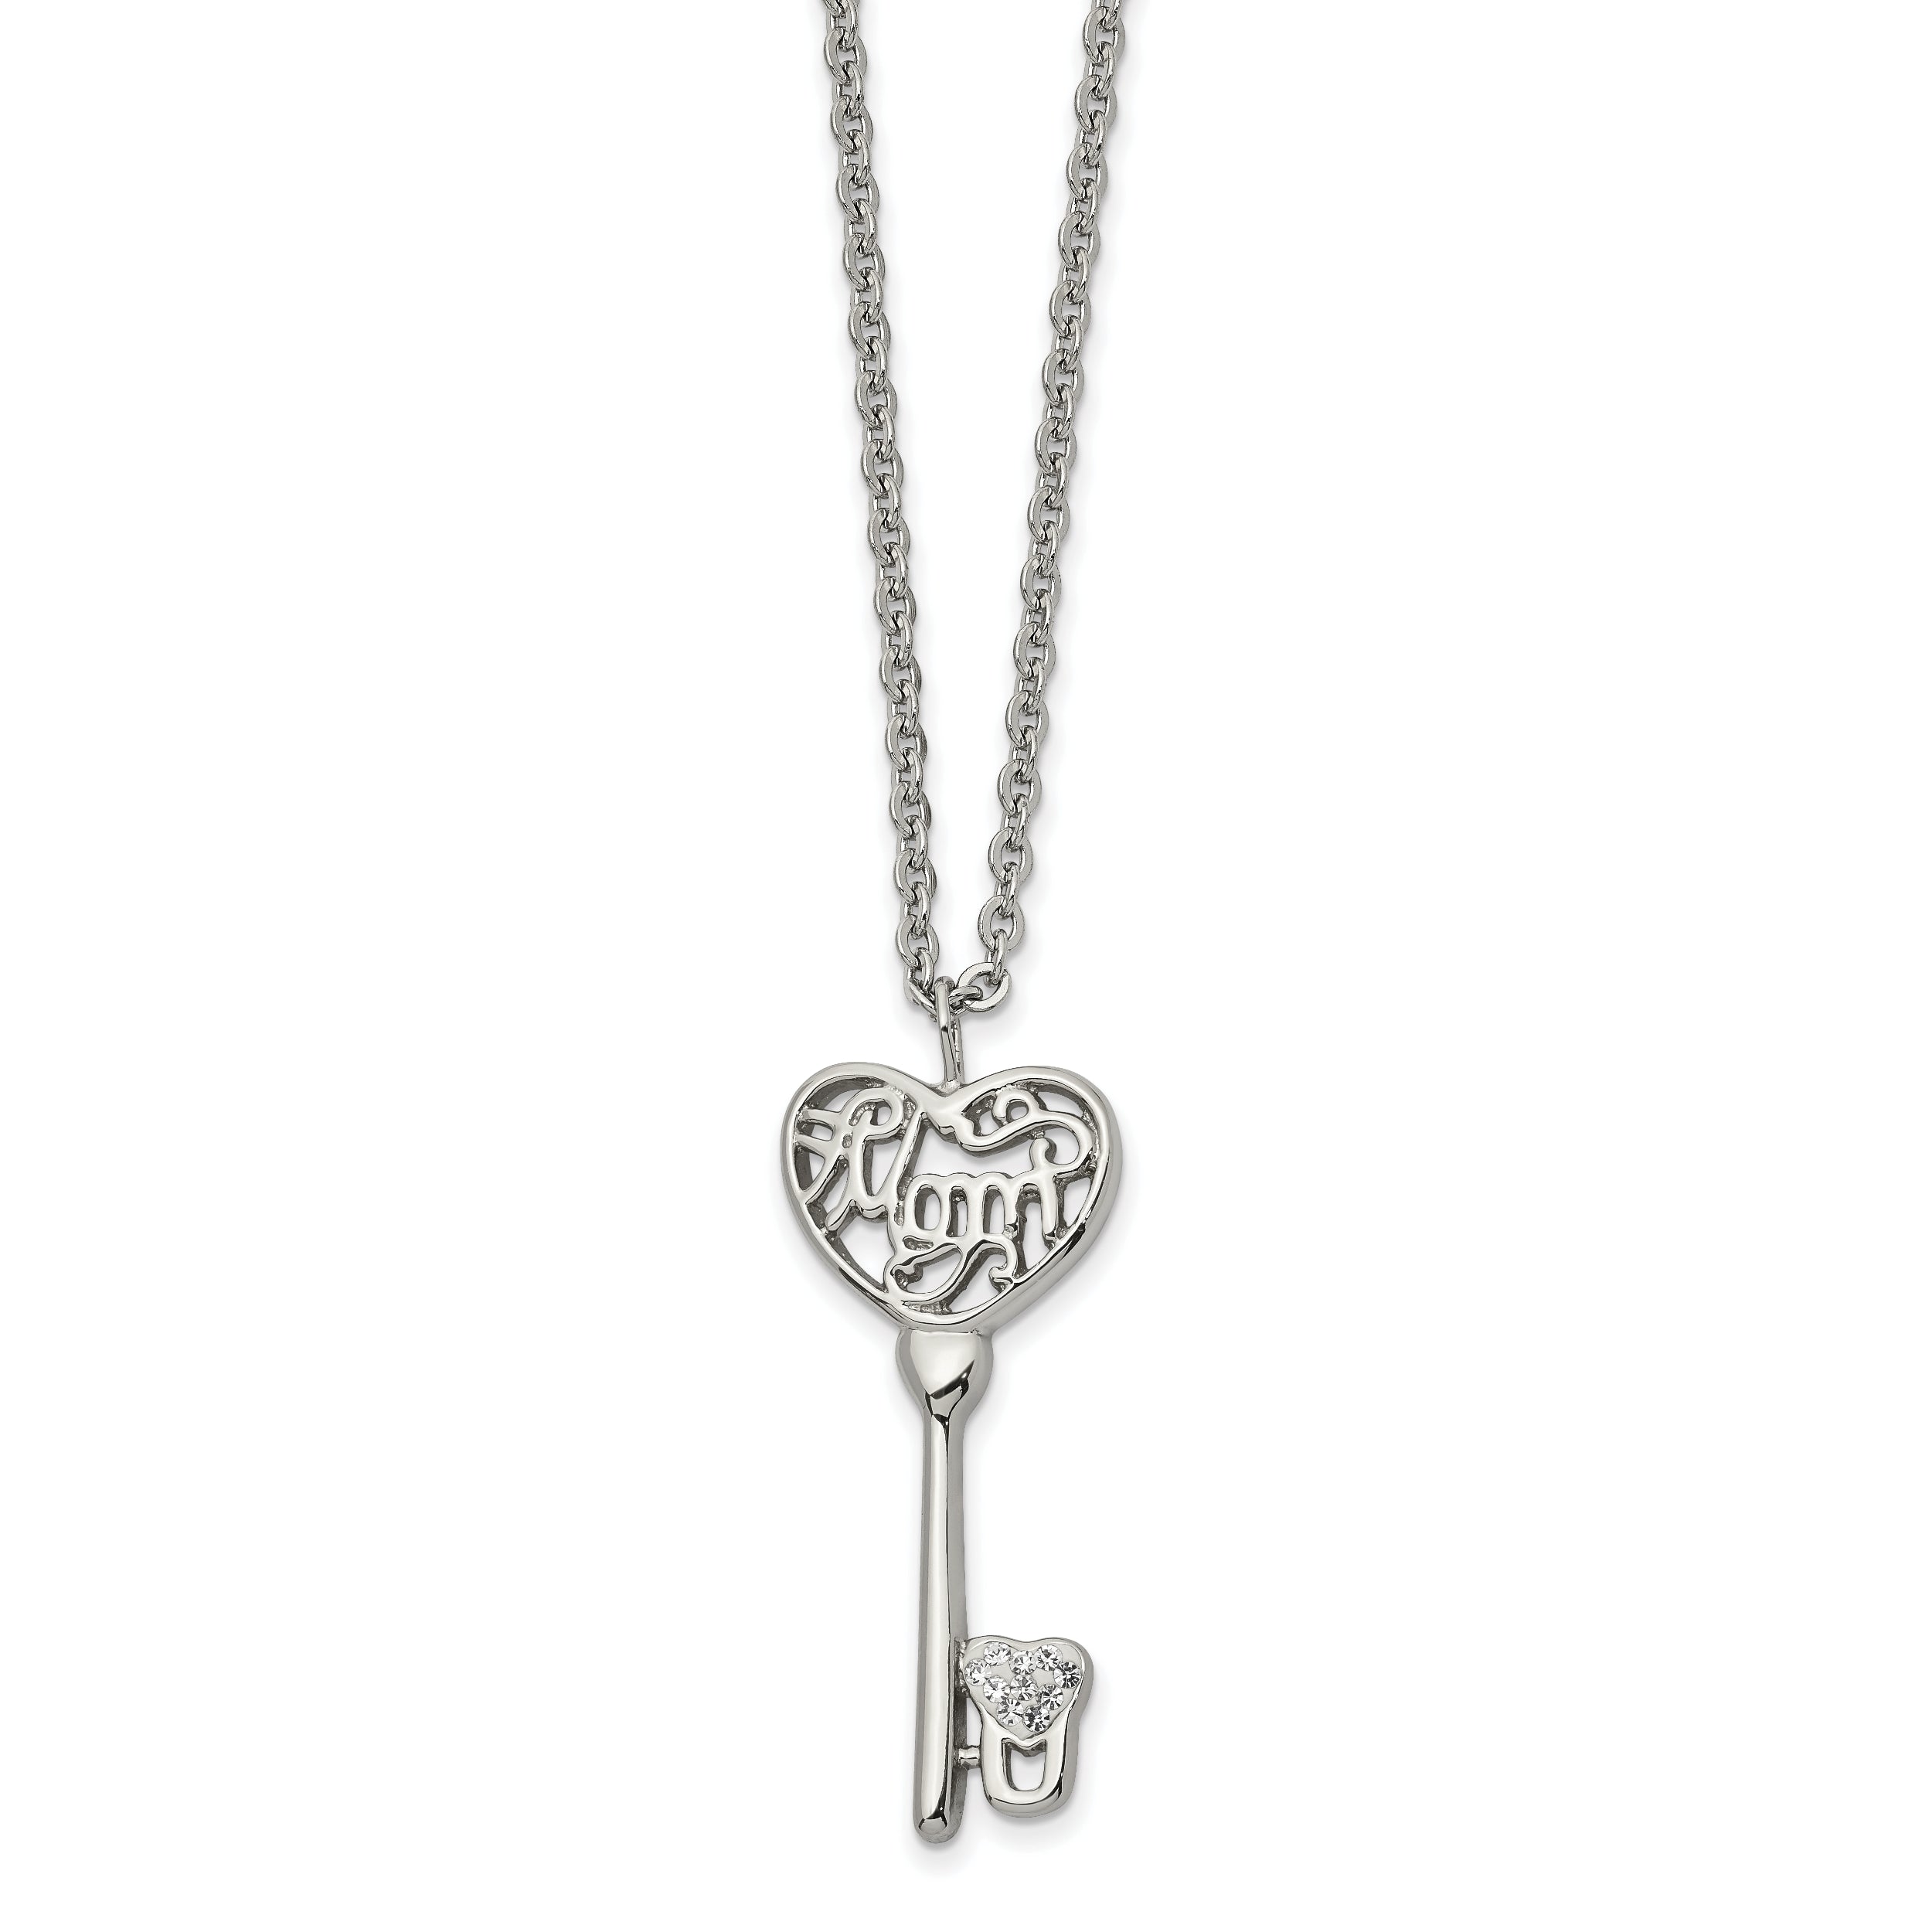 Chisel Stainless Steel Polished Clear Crystal Mom Heart Key Pendant on a 20 inch Cable Chain Necklace